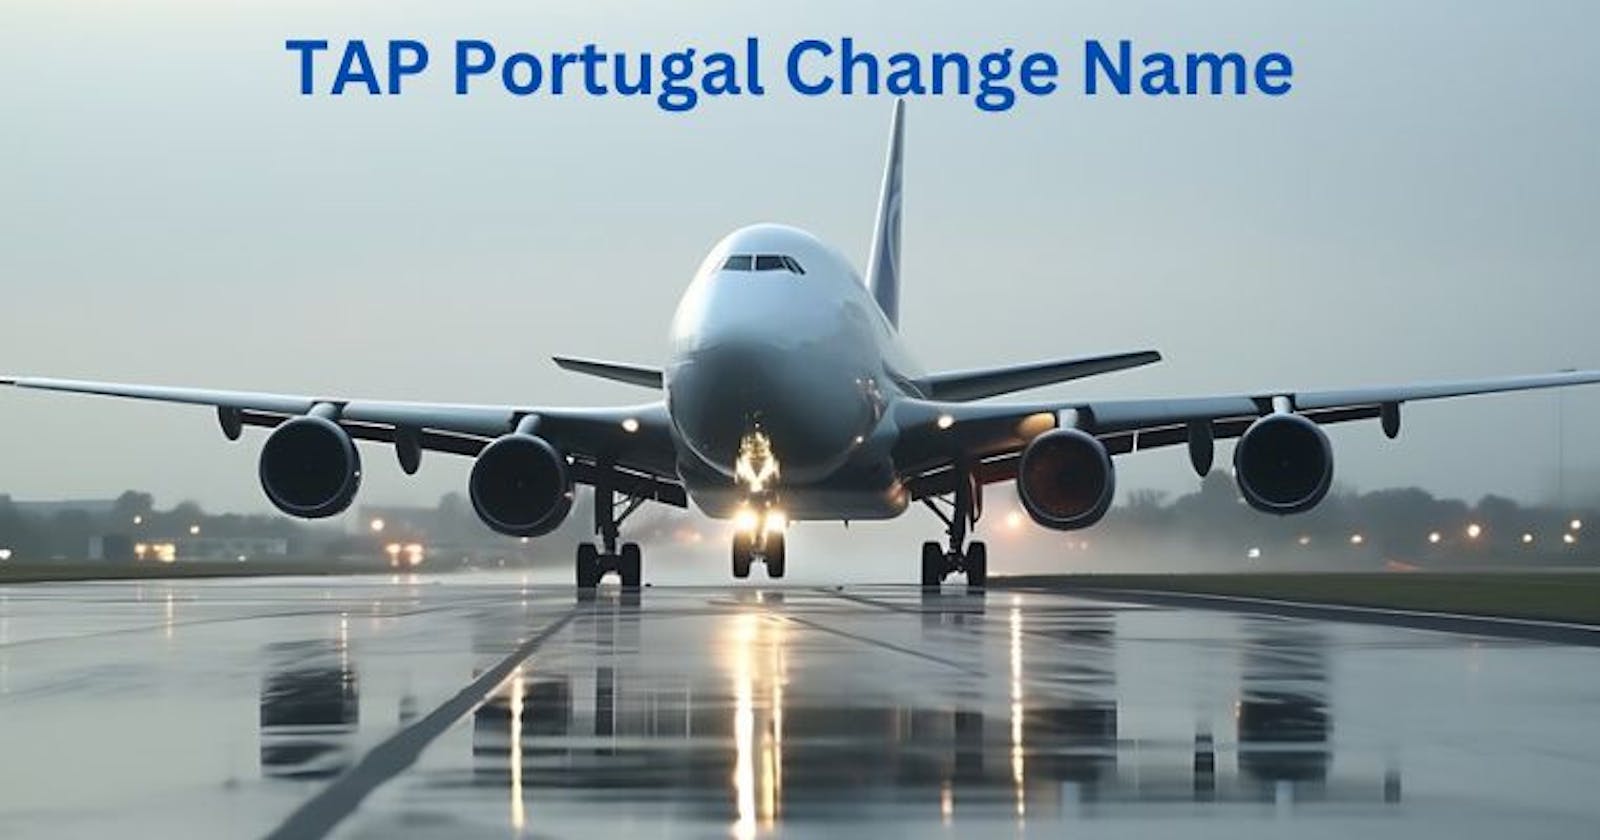 How to Change Name on TAP Portugal Flight Ticket?